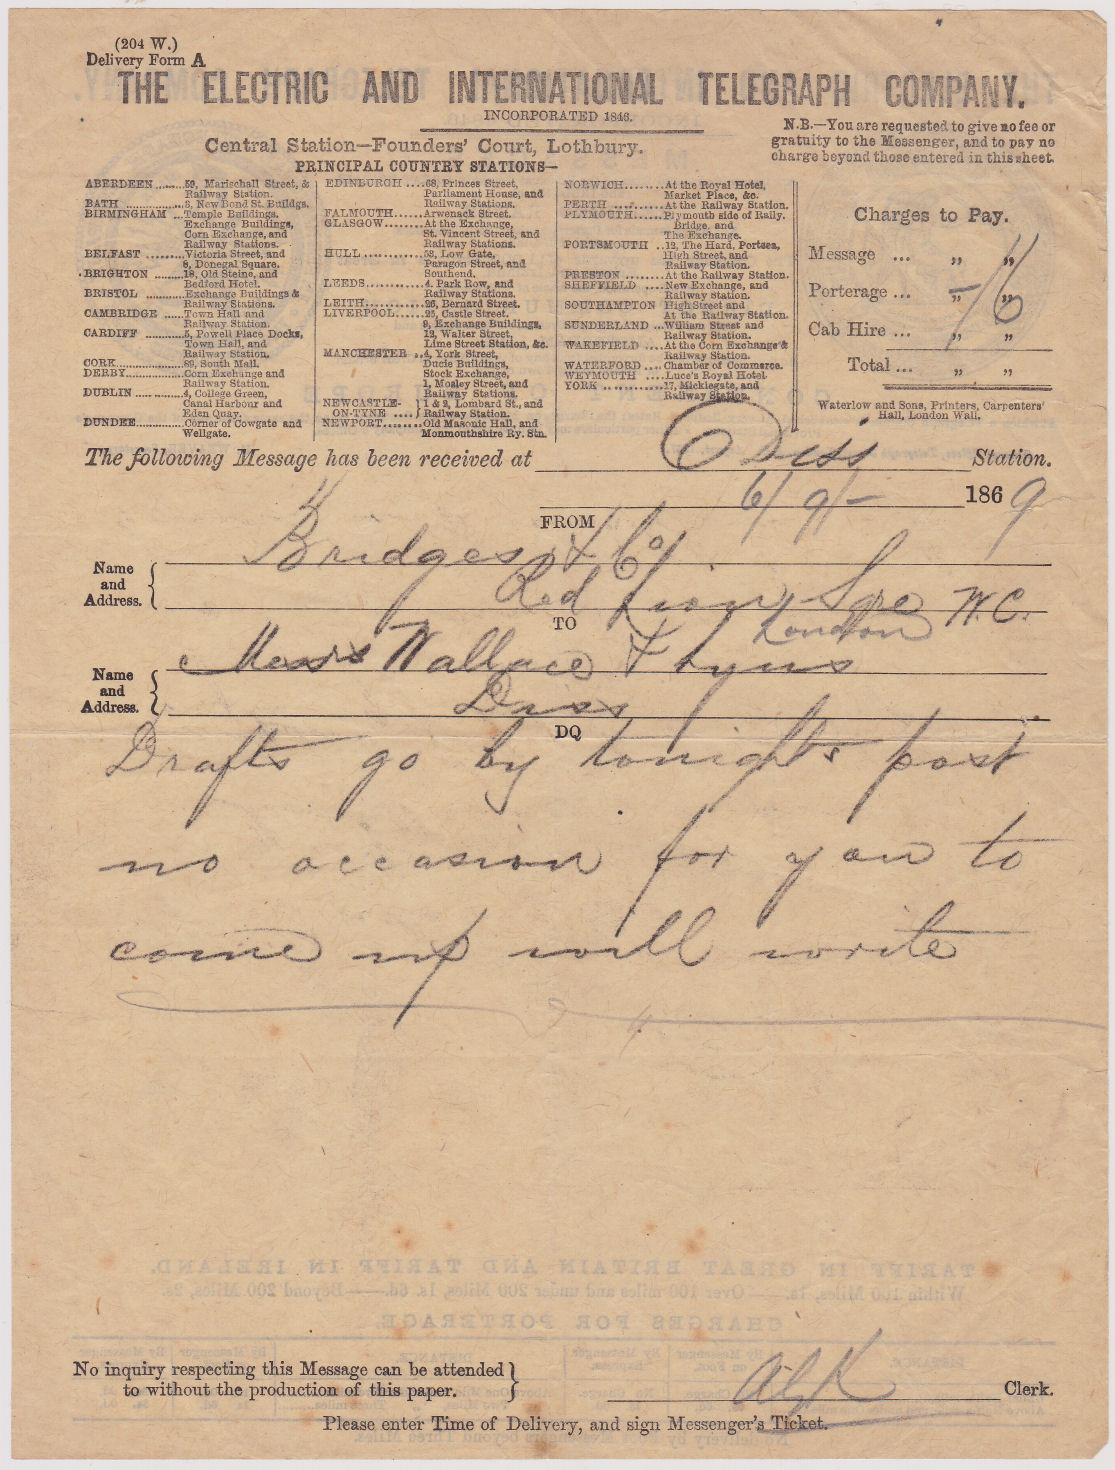 Electric Telegraph Company Form A - front.